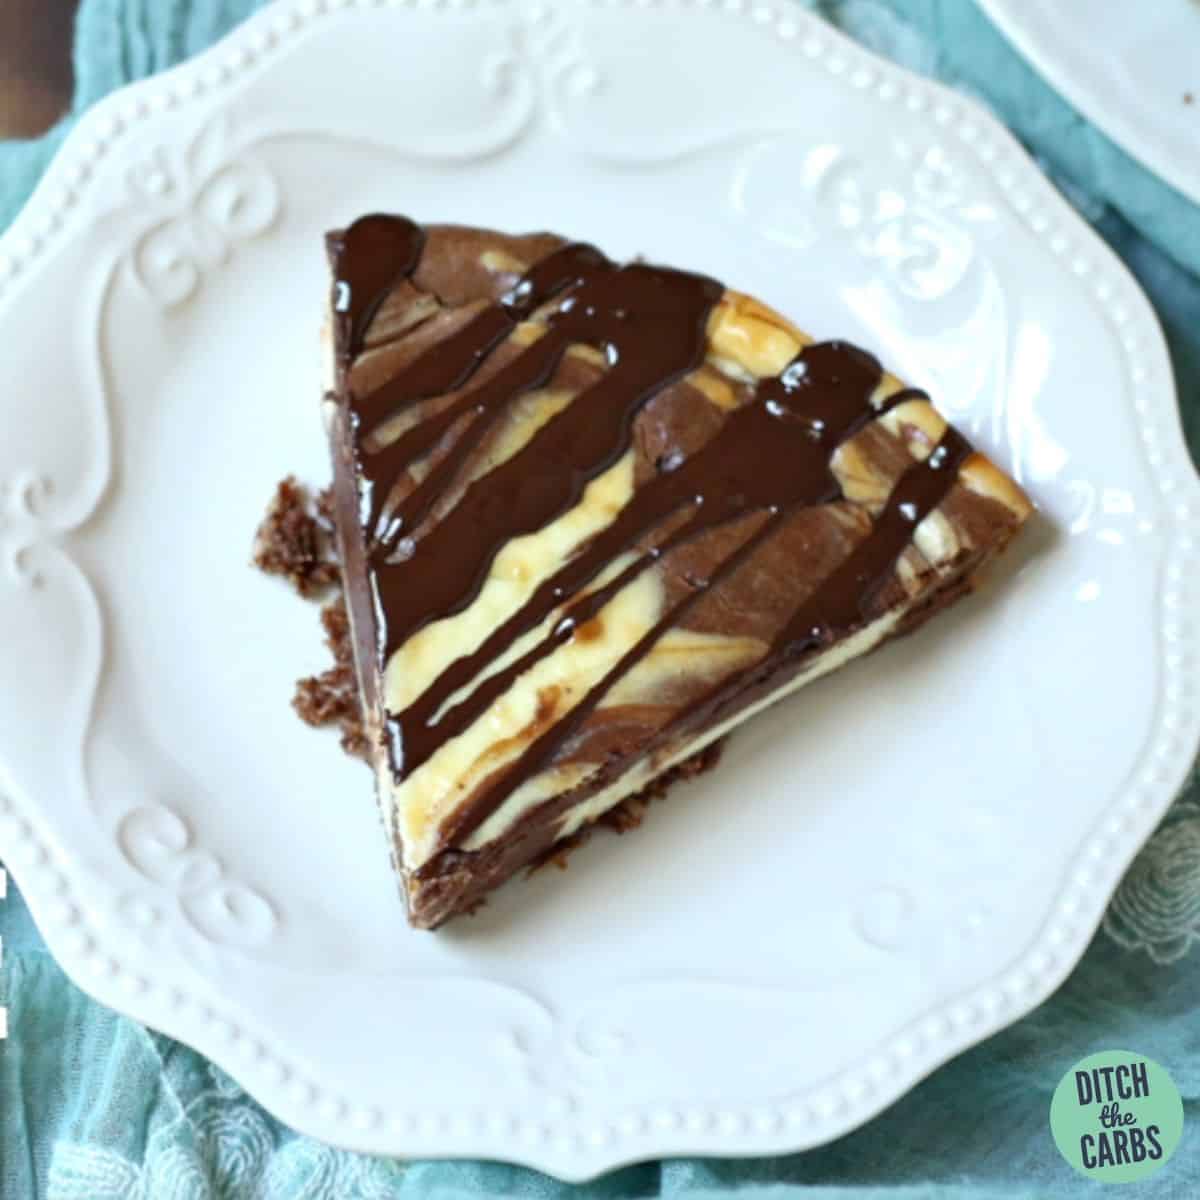 A slice of low carb chocolate swirl baked cheese cake drizzled with chocolate sauce on a plate